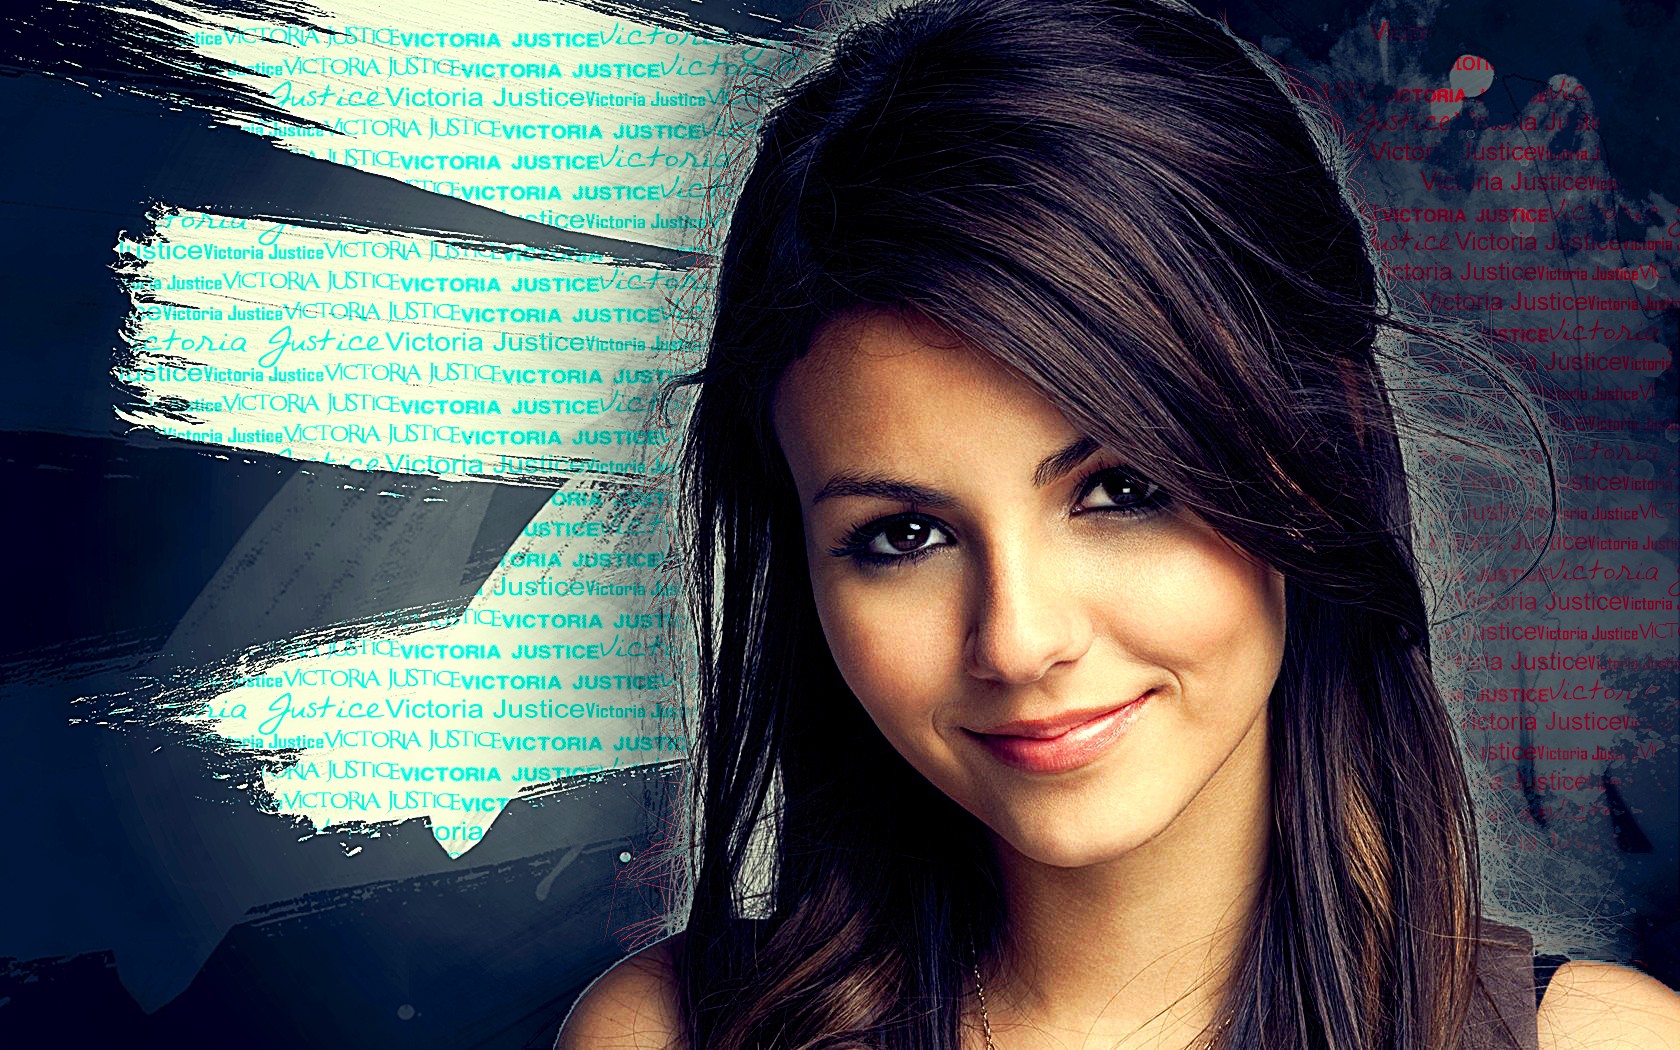 People 1680x1050 women Victoria Justice brunette face photoshopped closeup looking at viewer celebrity smiling portrait American women